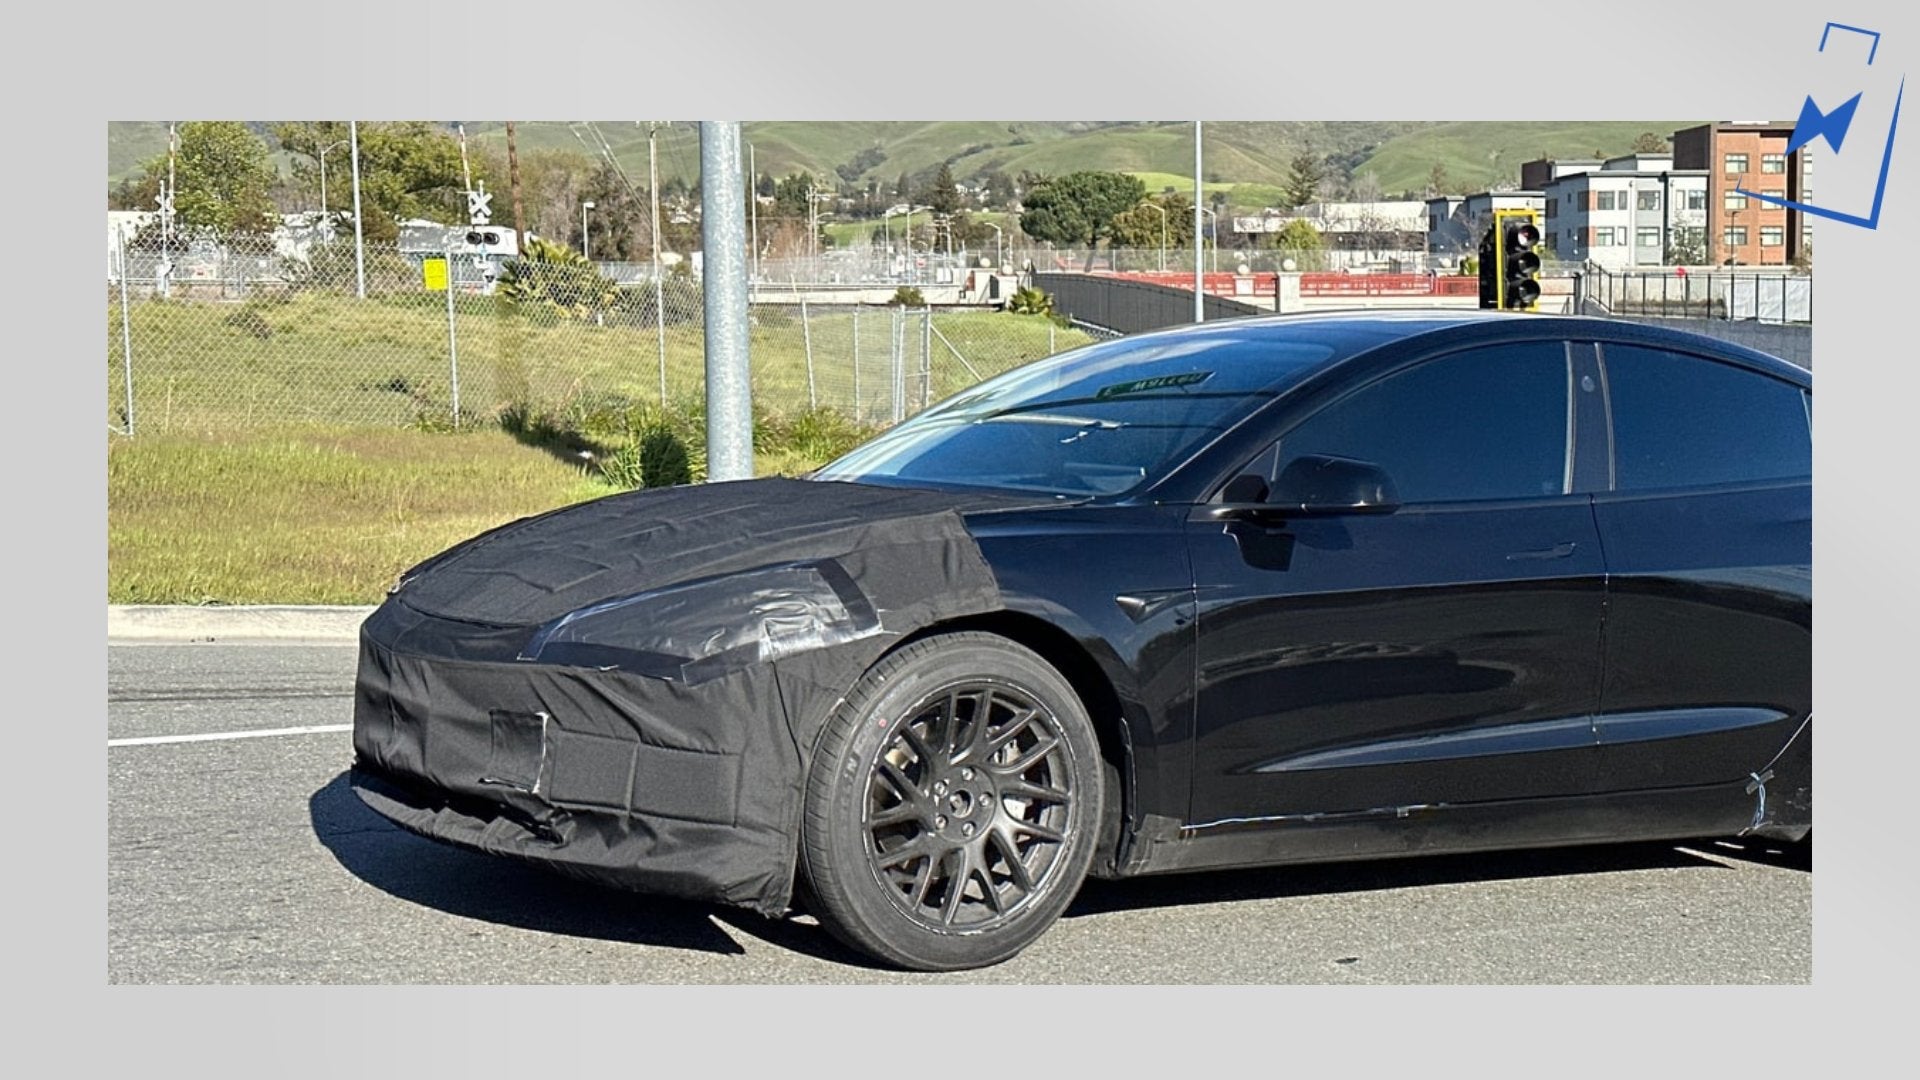 New information about the new Tesla Model 3 Project Highland